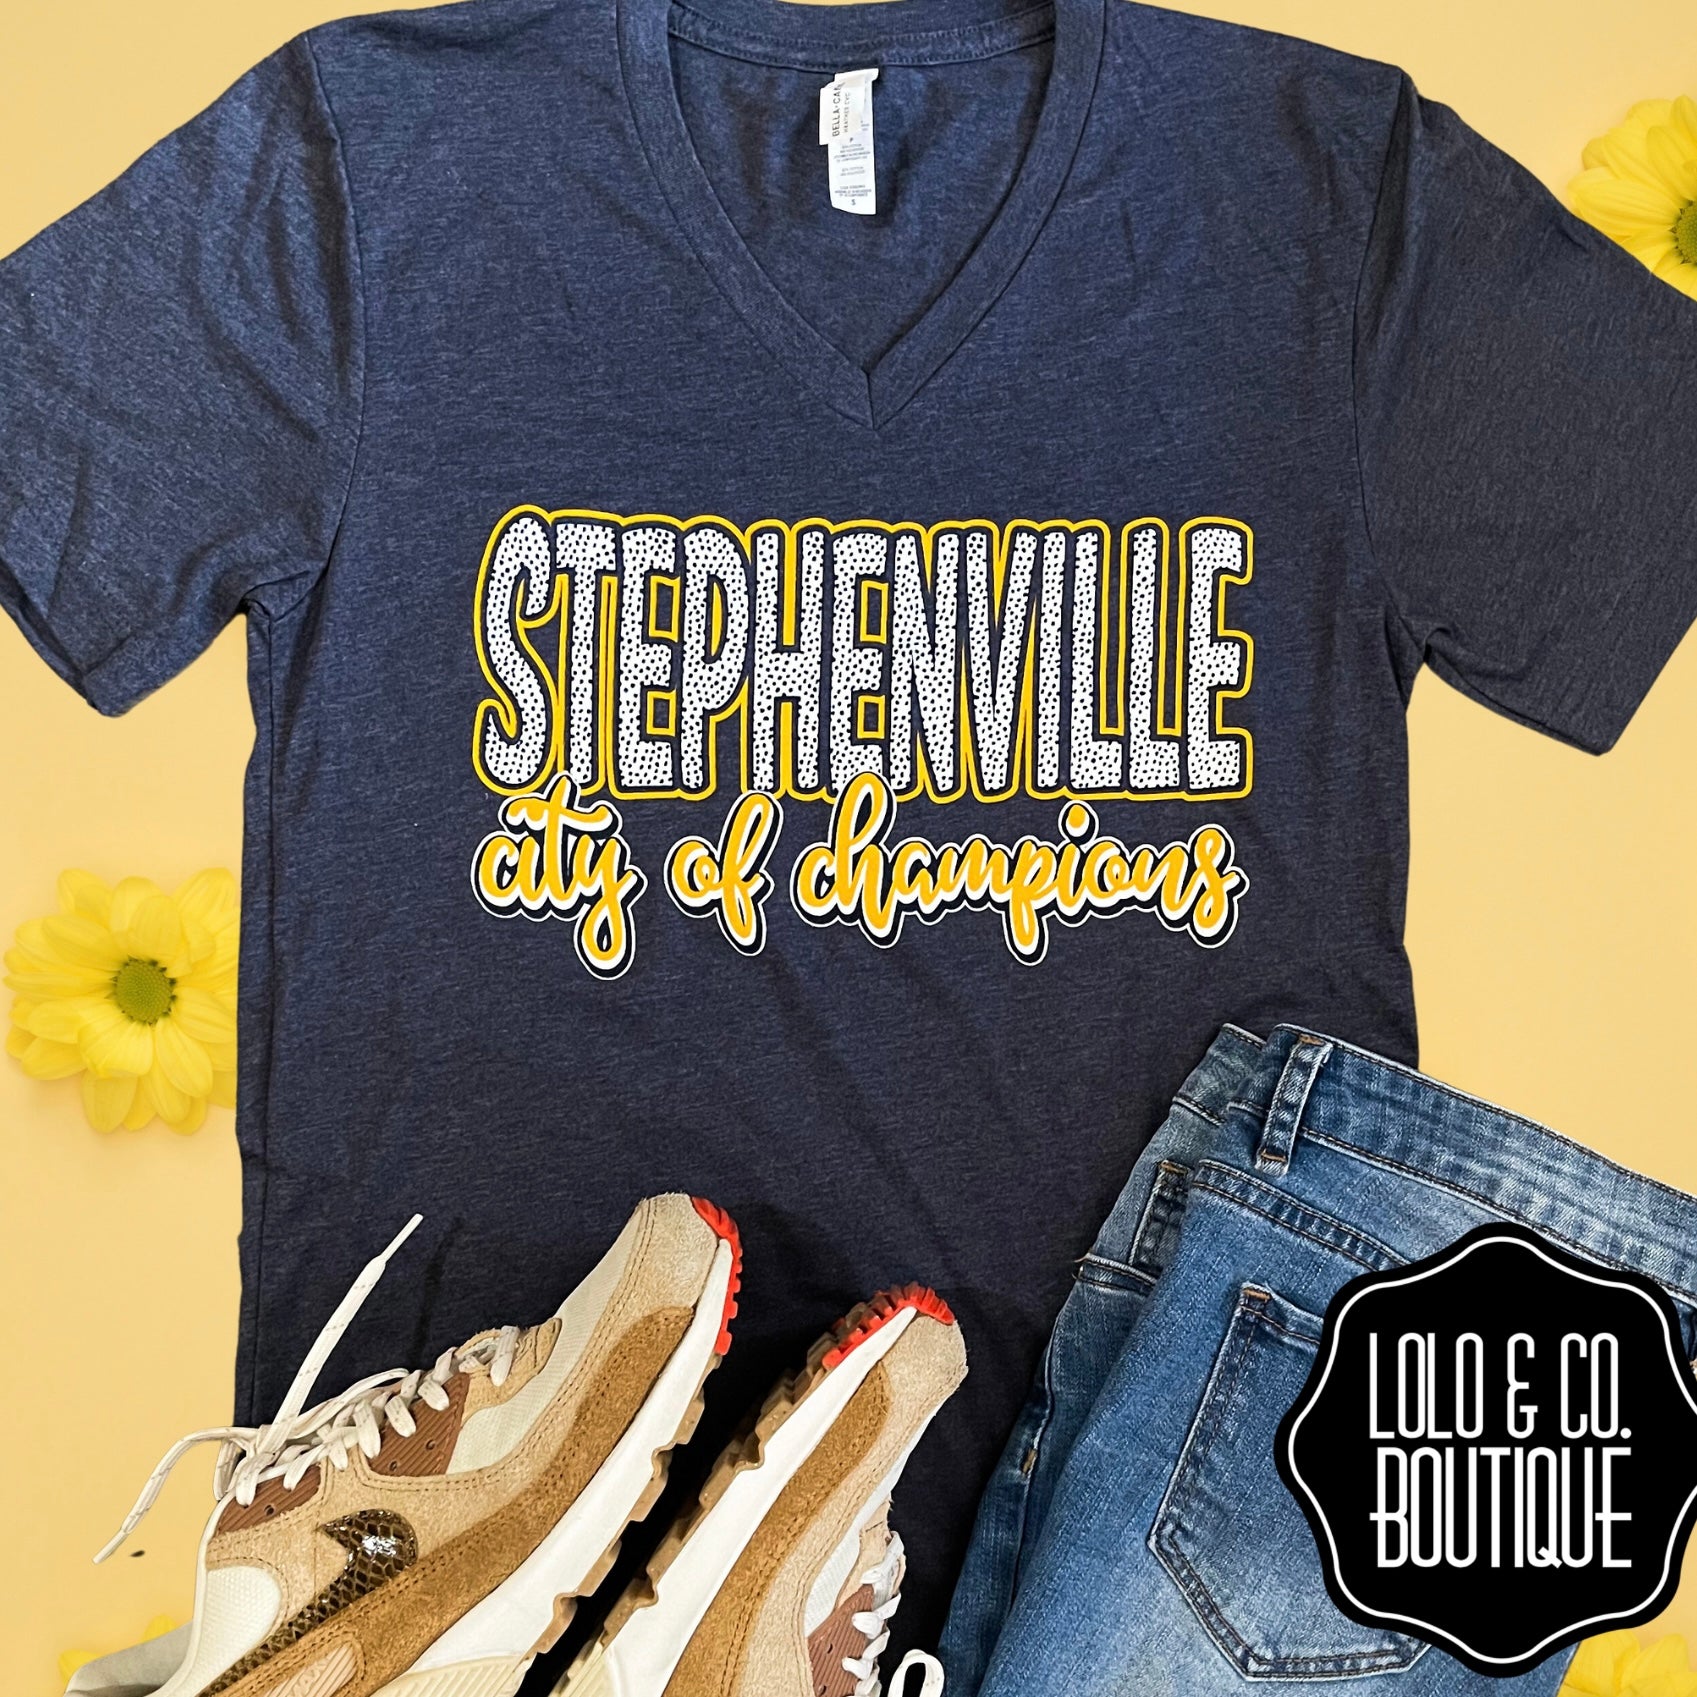 Stephenville City of Champs